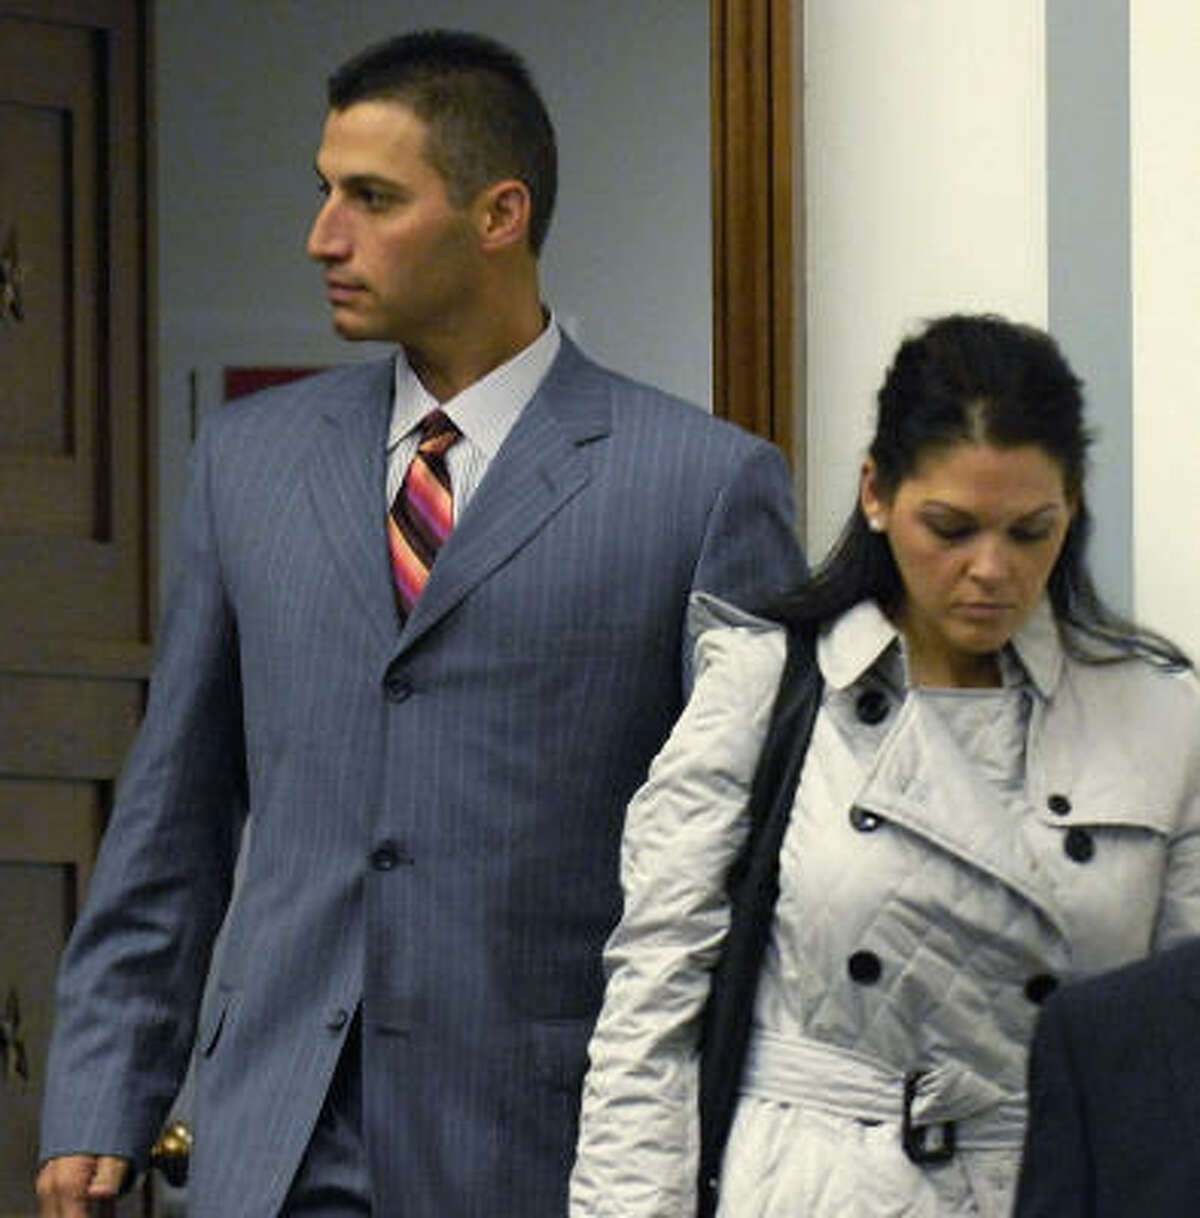 Andy and Laura Pettitte went to Washington for his deposition, but he did not have to testify in the House.